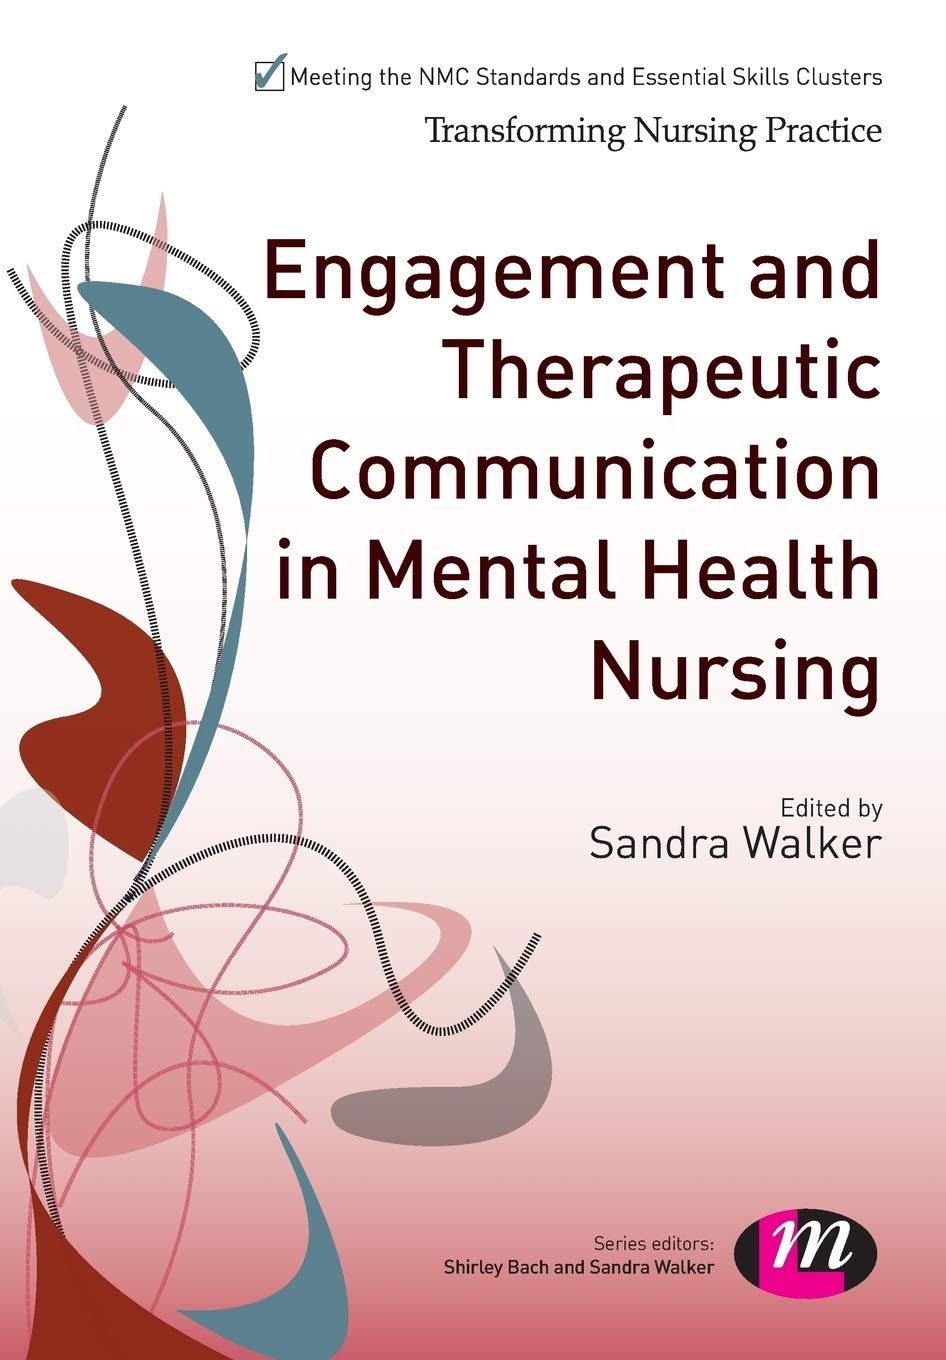 Engagement and Therapeutic Communication in Mental Health Nursing (Transforming Nursing Practice Series)  by Sandra Walker 